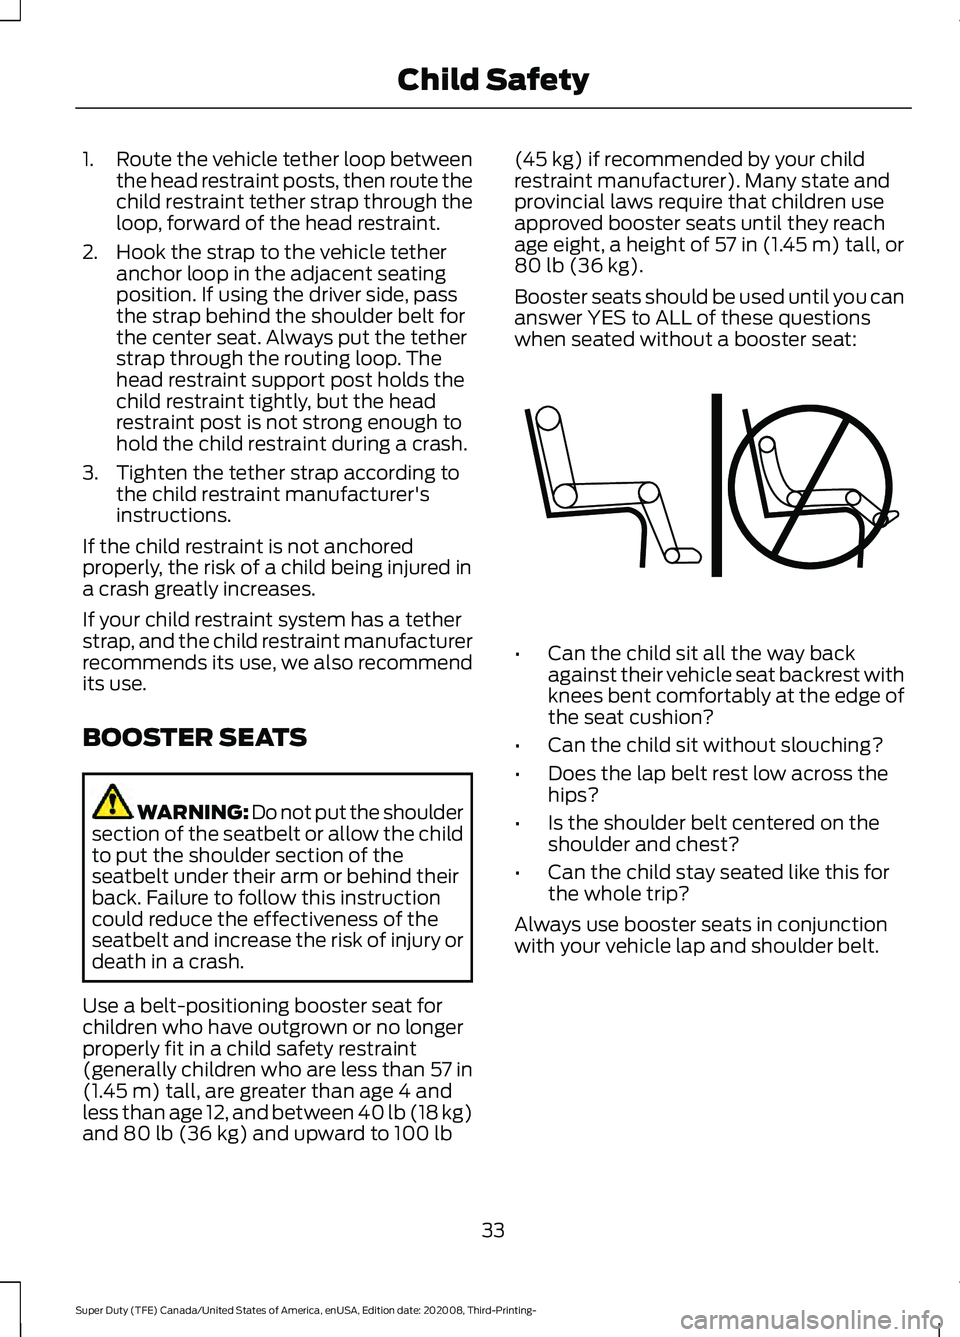 FORD F-450 2021 User Guide 1.
Route the vehicle tether loop between
the head restraint posts, then route the
child restraint tether strap through the
loop, forward of the head restraint.
2. Hook the strap to the vehicle tether 